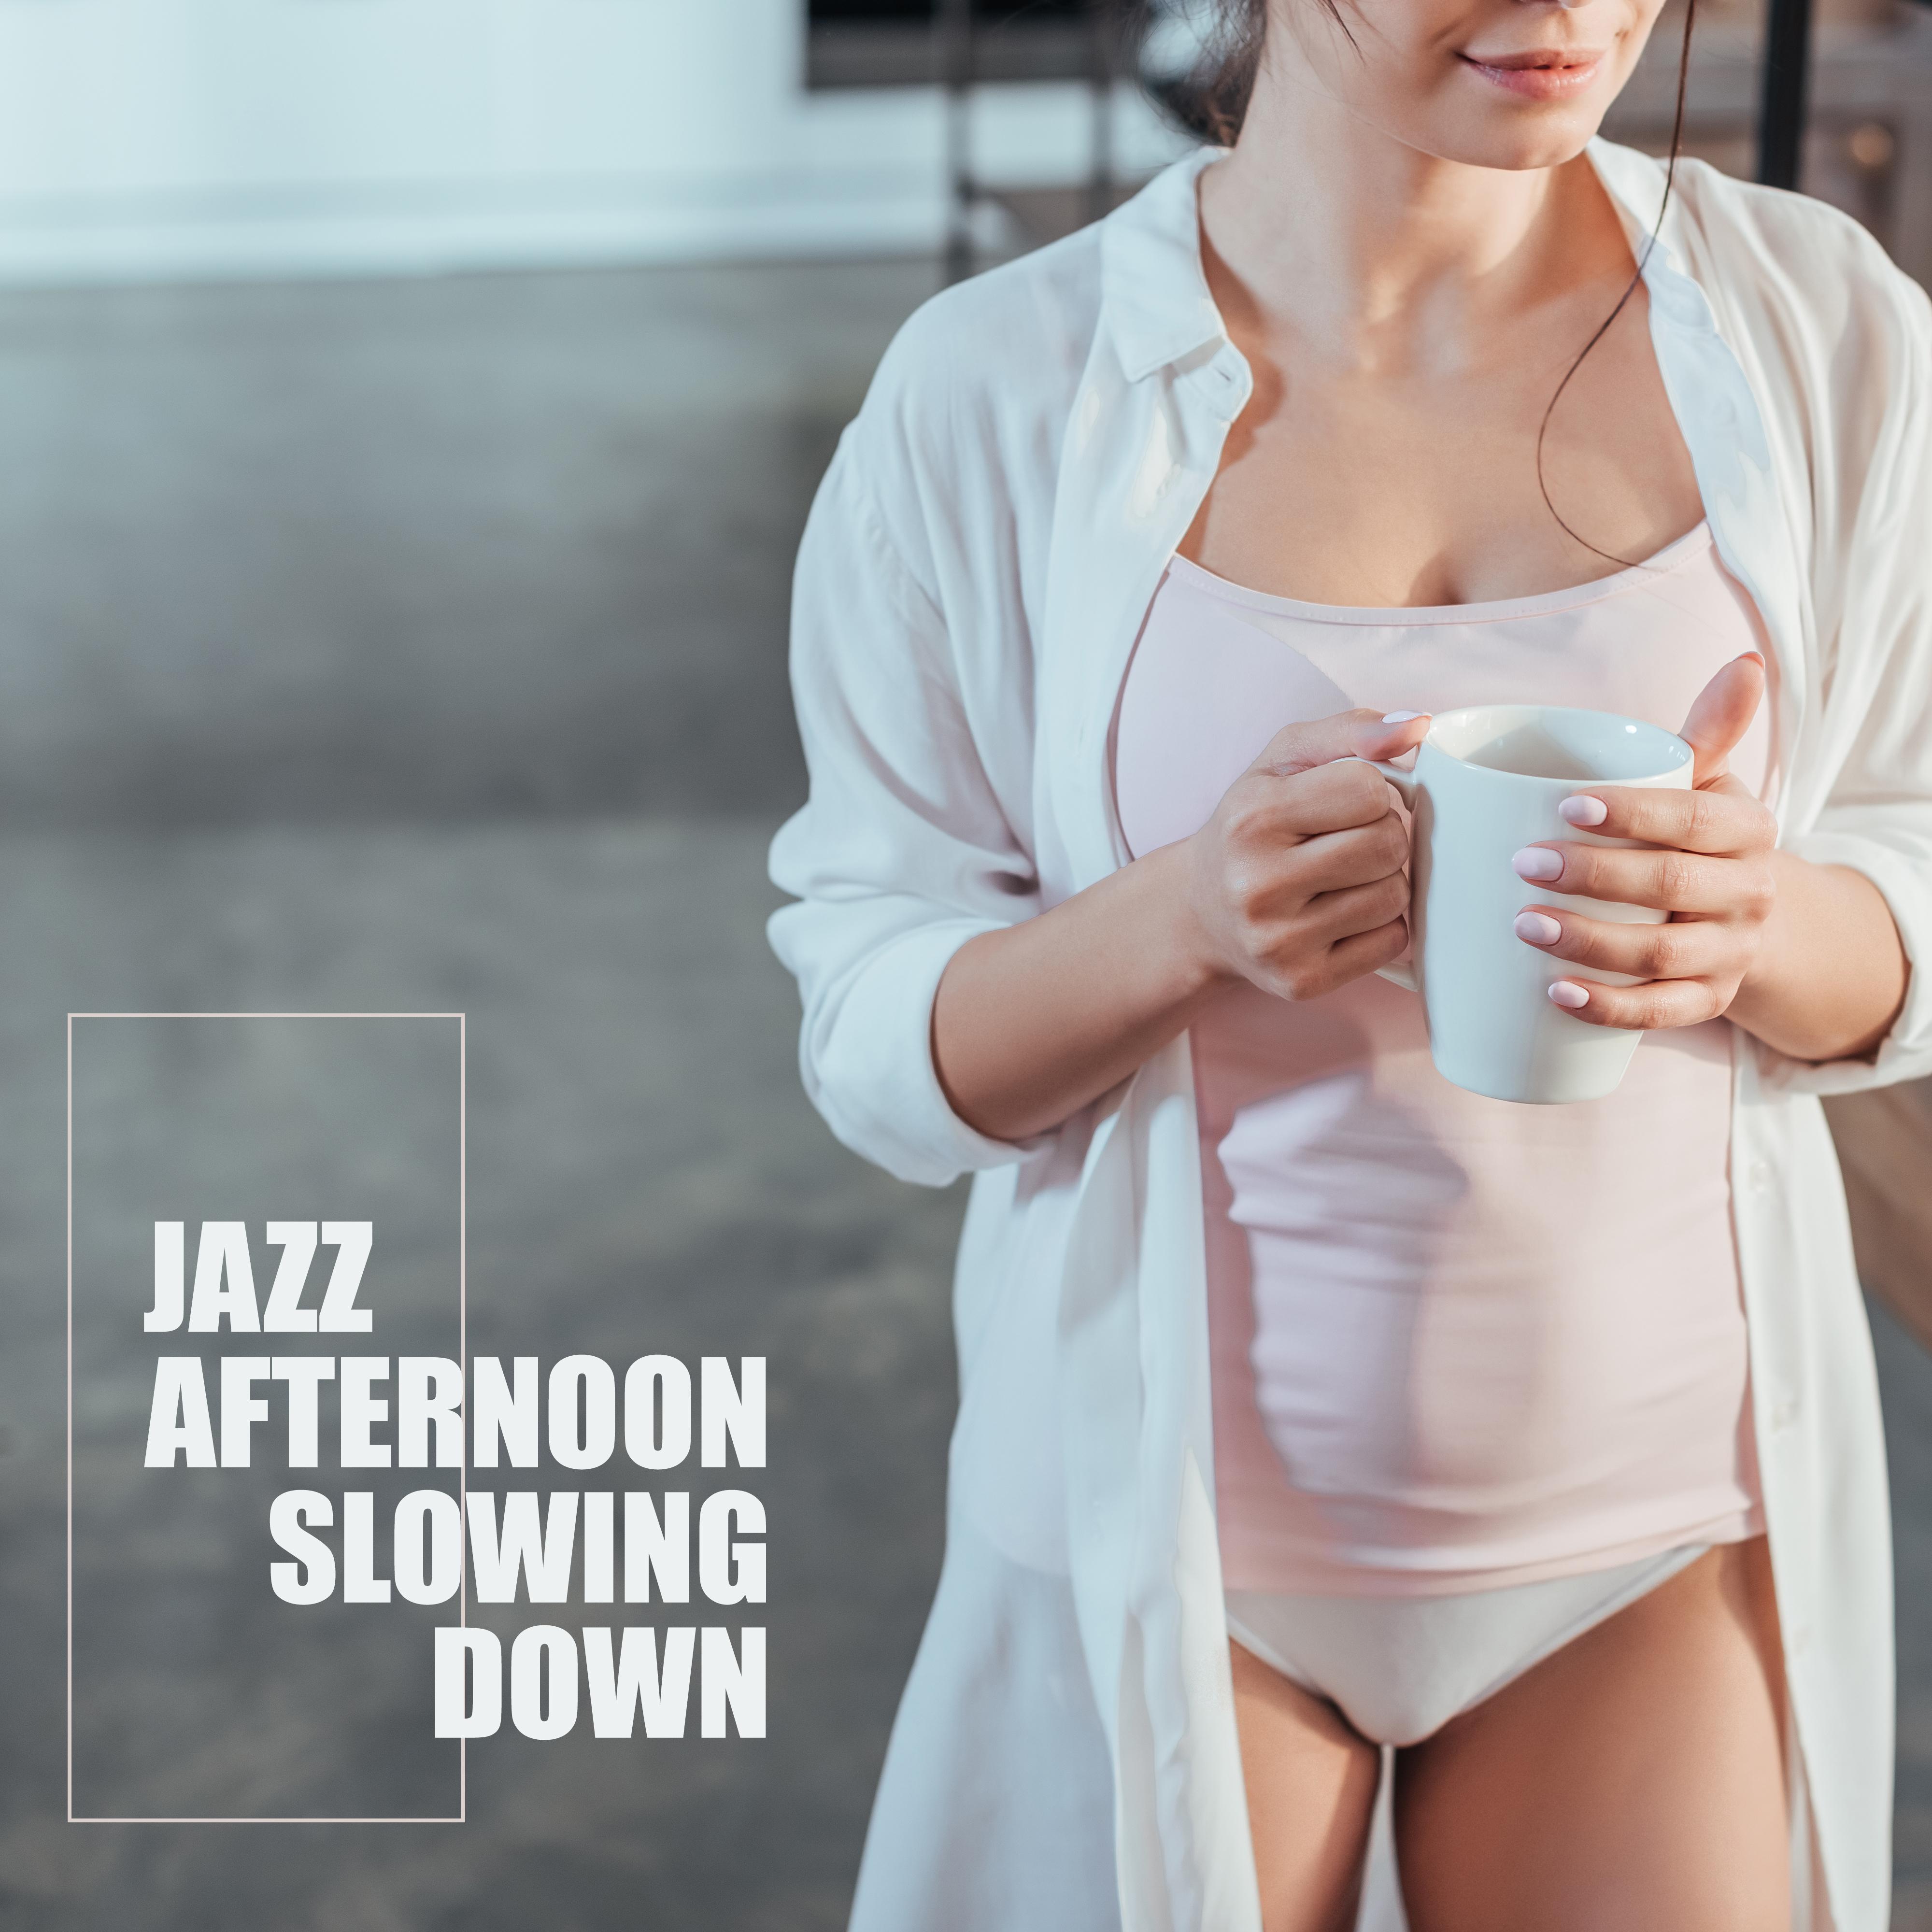 Jazz Afternoon Slowing Down: Smooth Jazz 2019 Relaxing Music Perfect for Chill After Work, Coffee with Friends, Dinner with Love, Saxophone Soothing Sounds